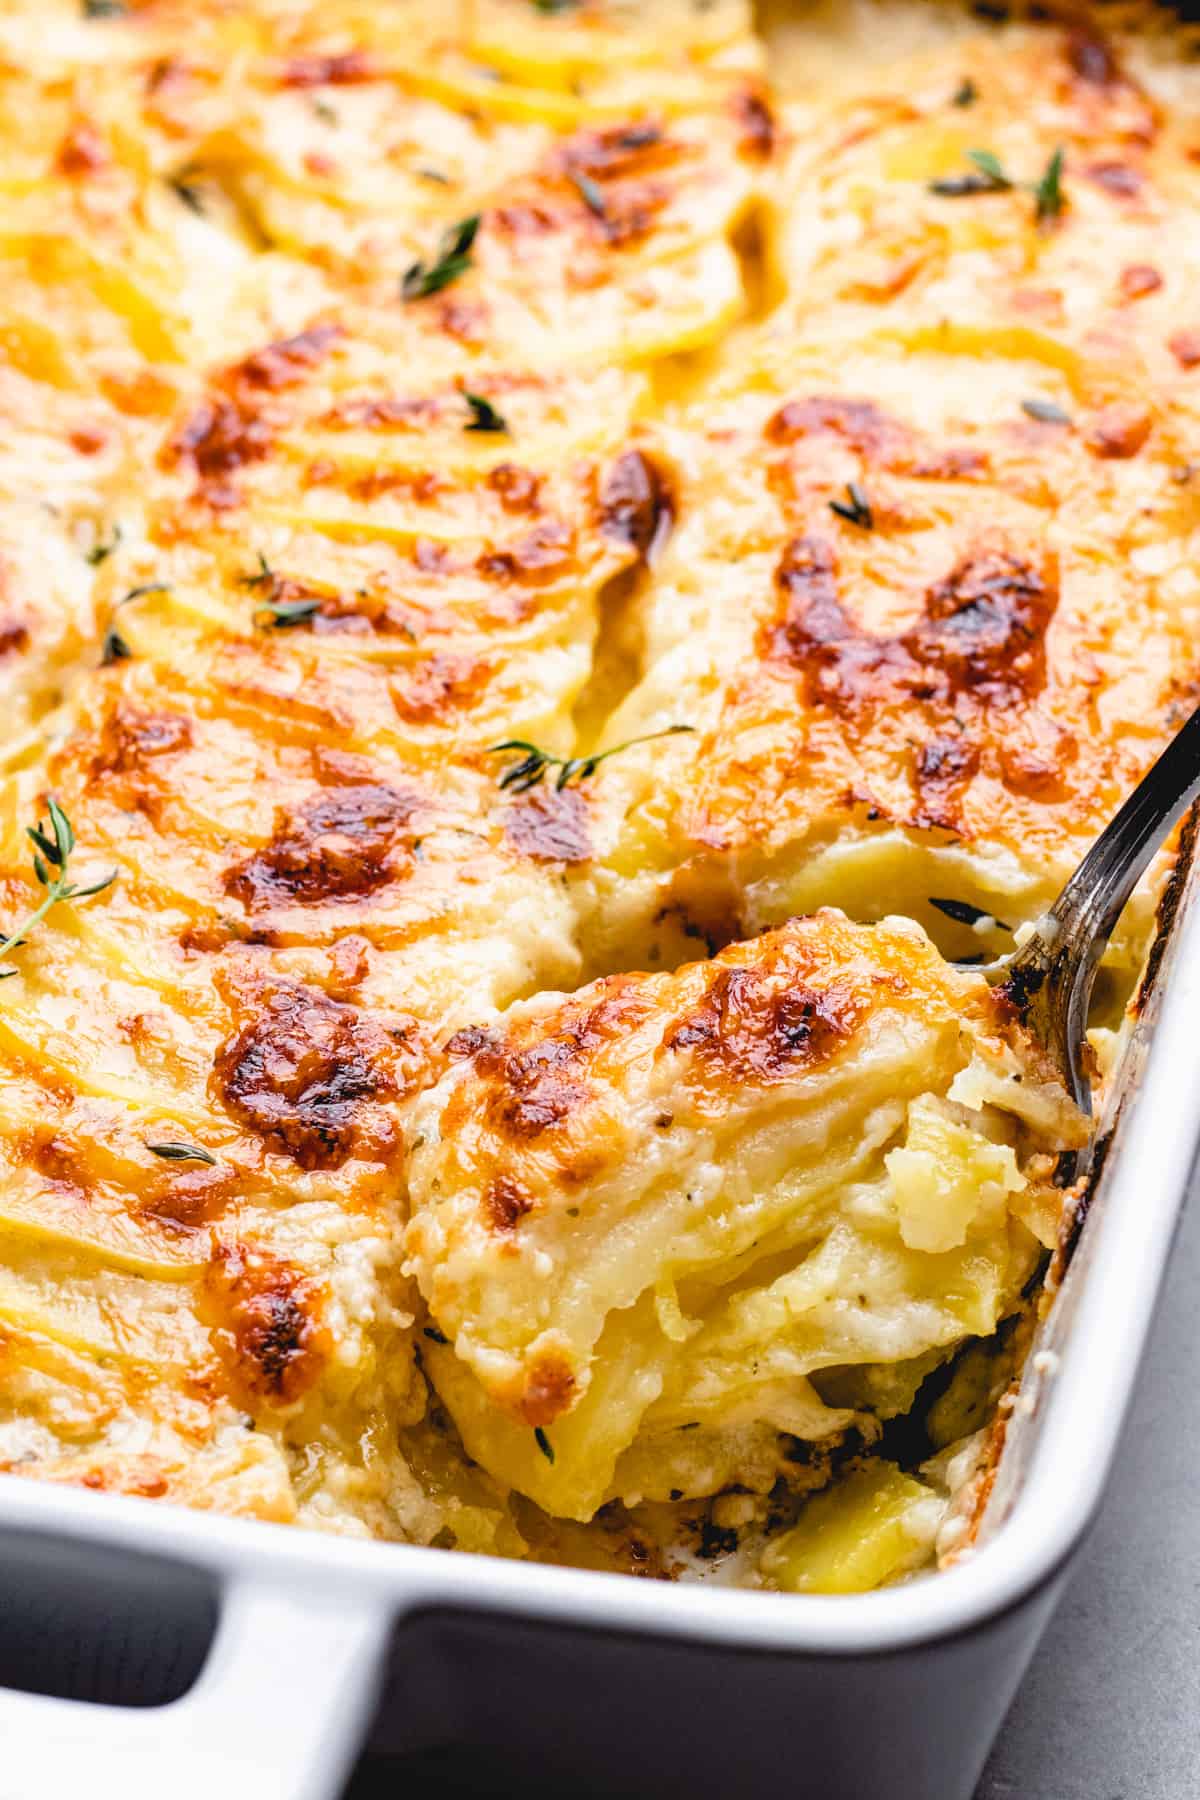 Gruyere Potatoes Au Gratin wiht a cheesy golden brown top in a white casserole with a spoon.